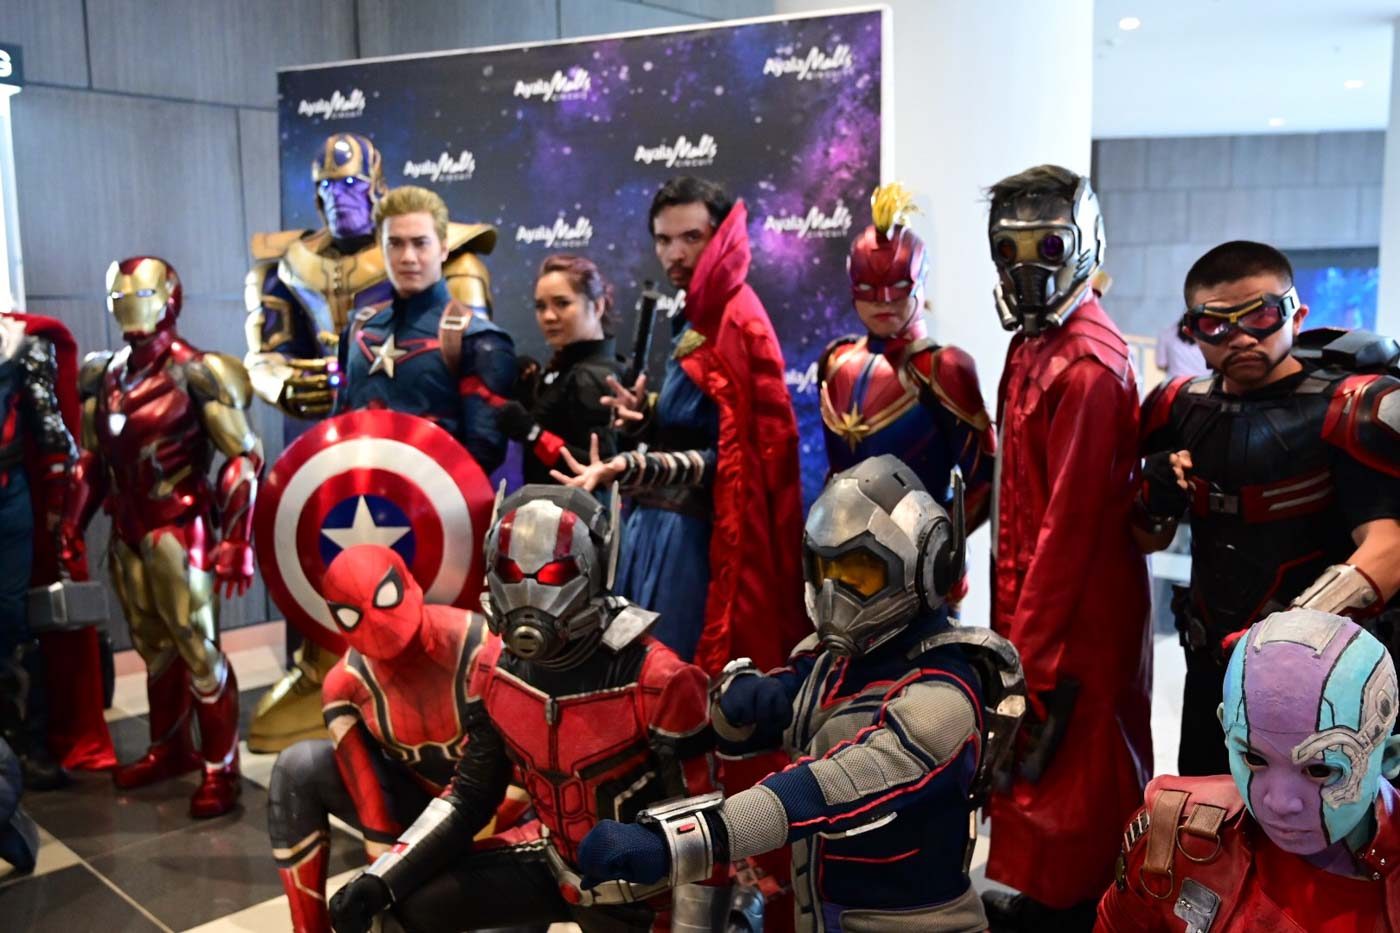 IN PHOTOS: Filipino fans line up to watch 'Avengers: Endgame'